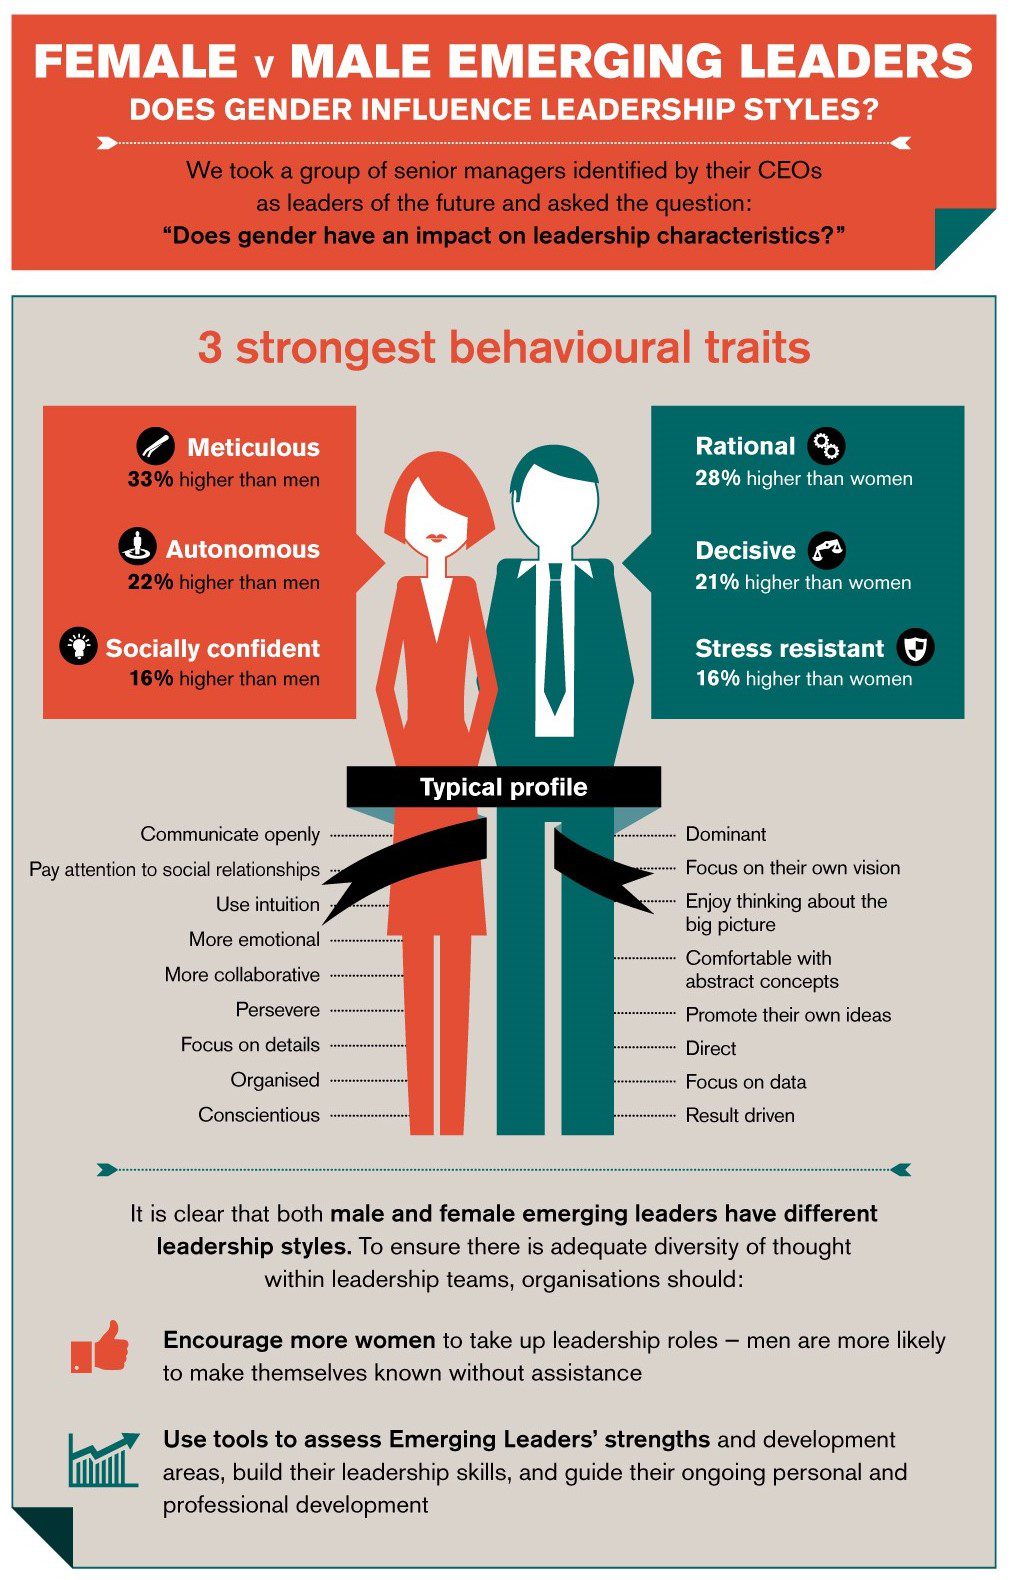 Does gender influence leadership styles? - Infographic